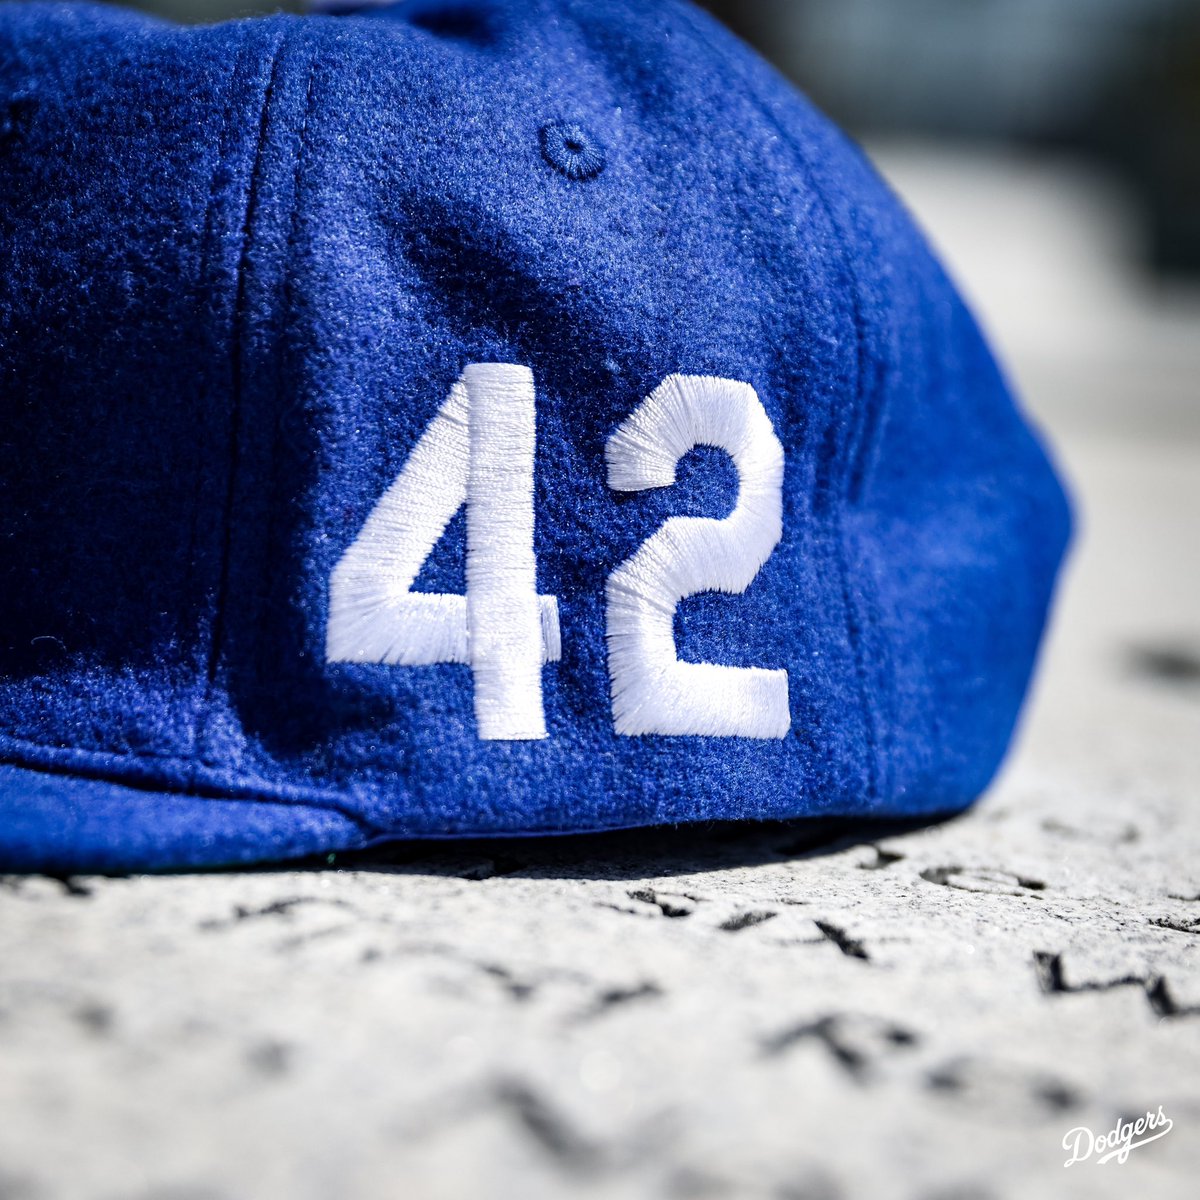 42. Celebrate Jackie Robinson Day at Dodger Stadium on 4/15 and receive a Jackie Robinson Hat presented by @UCLAHealth. For tickets, visit Dodgers.com/promotions.